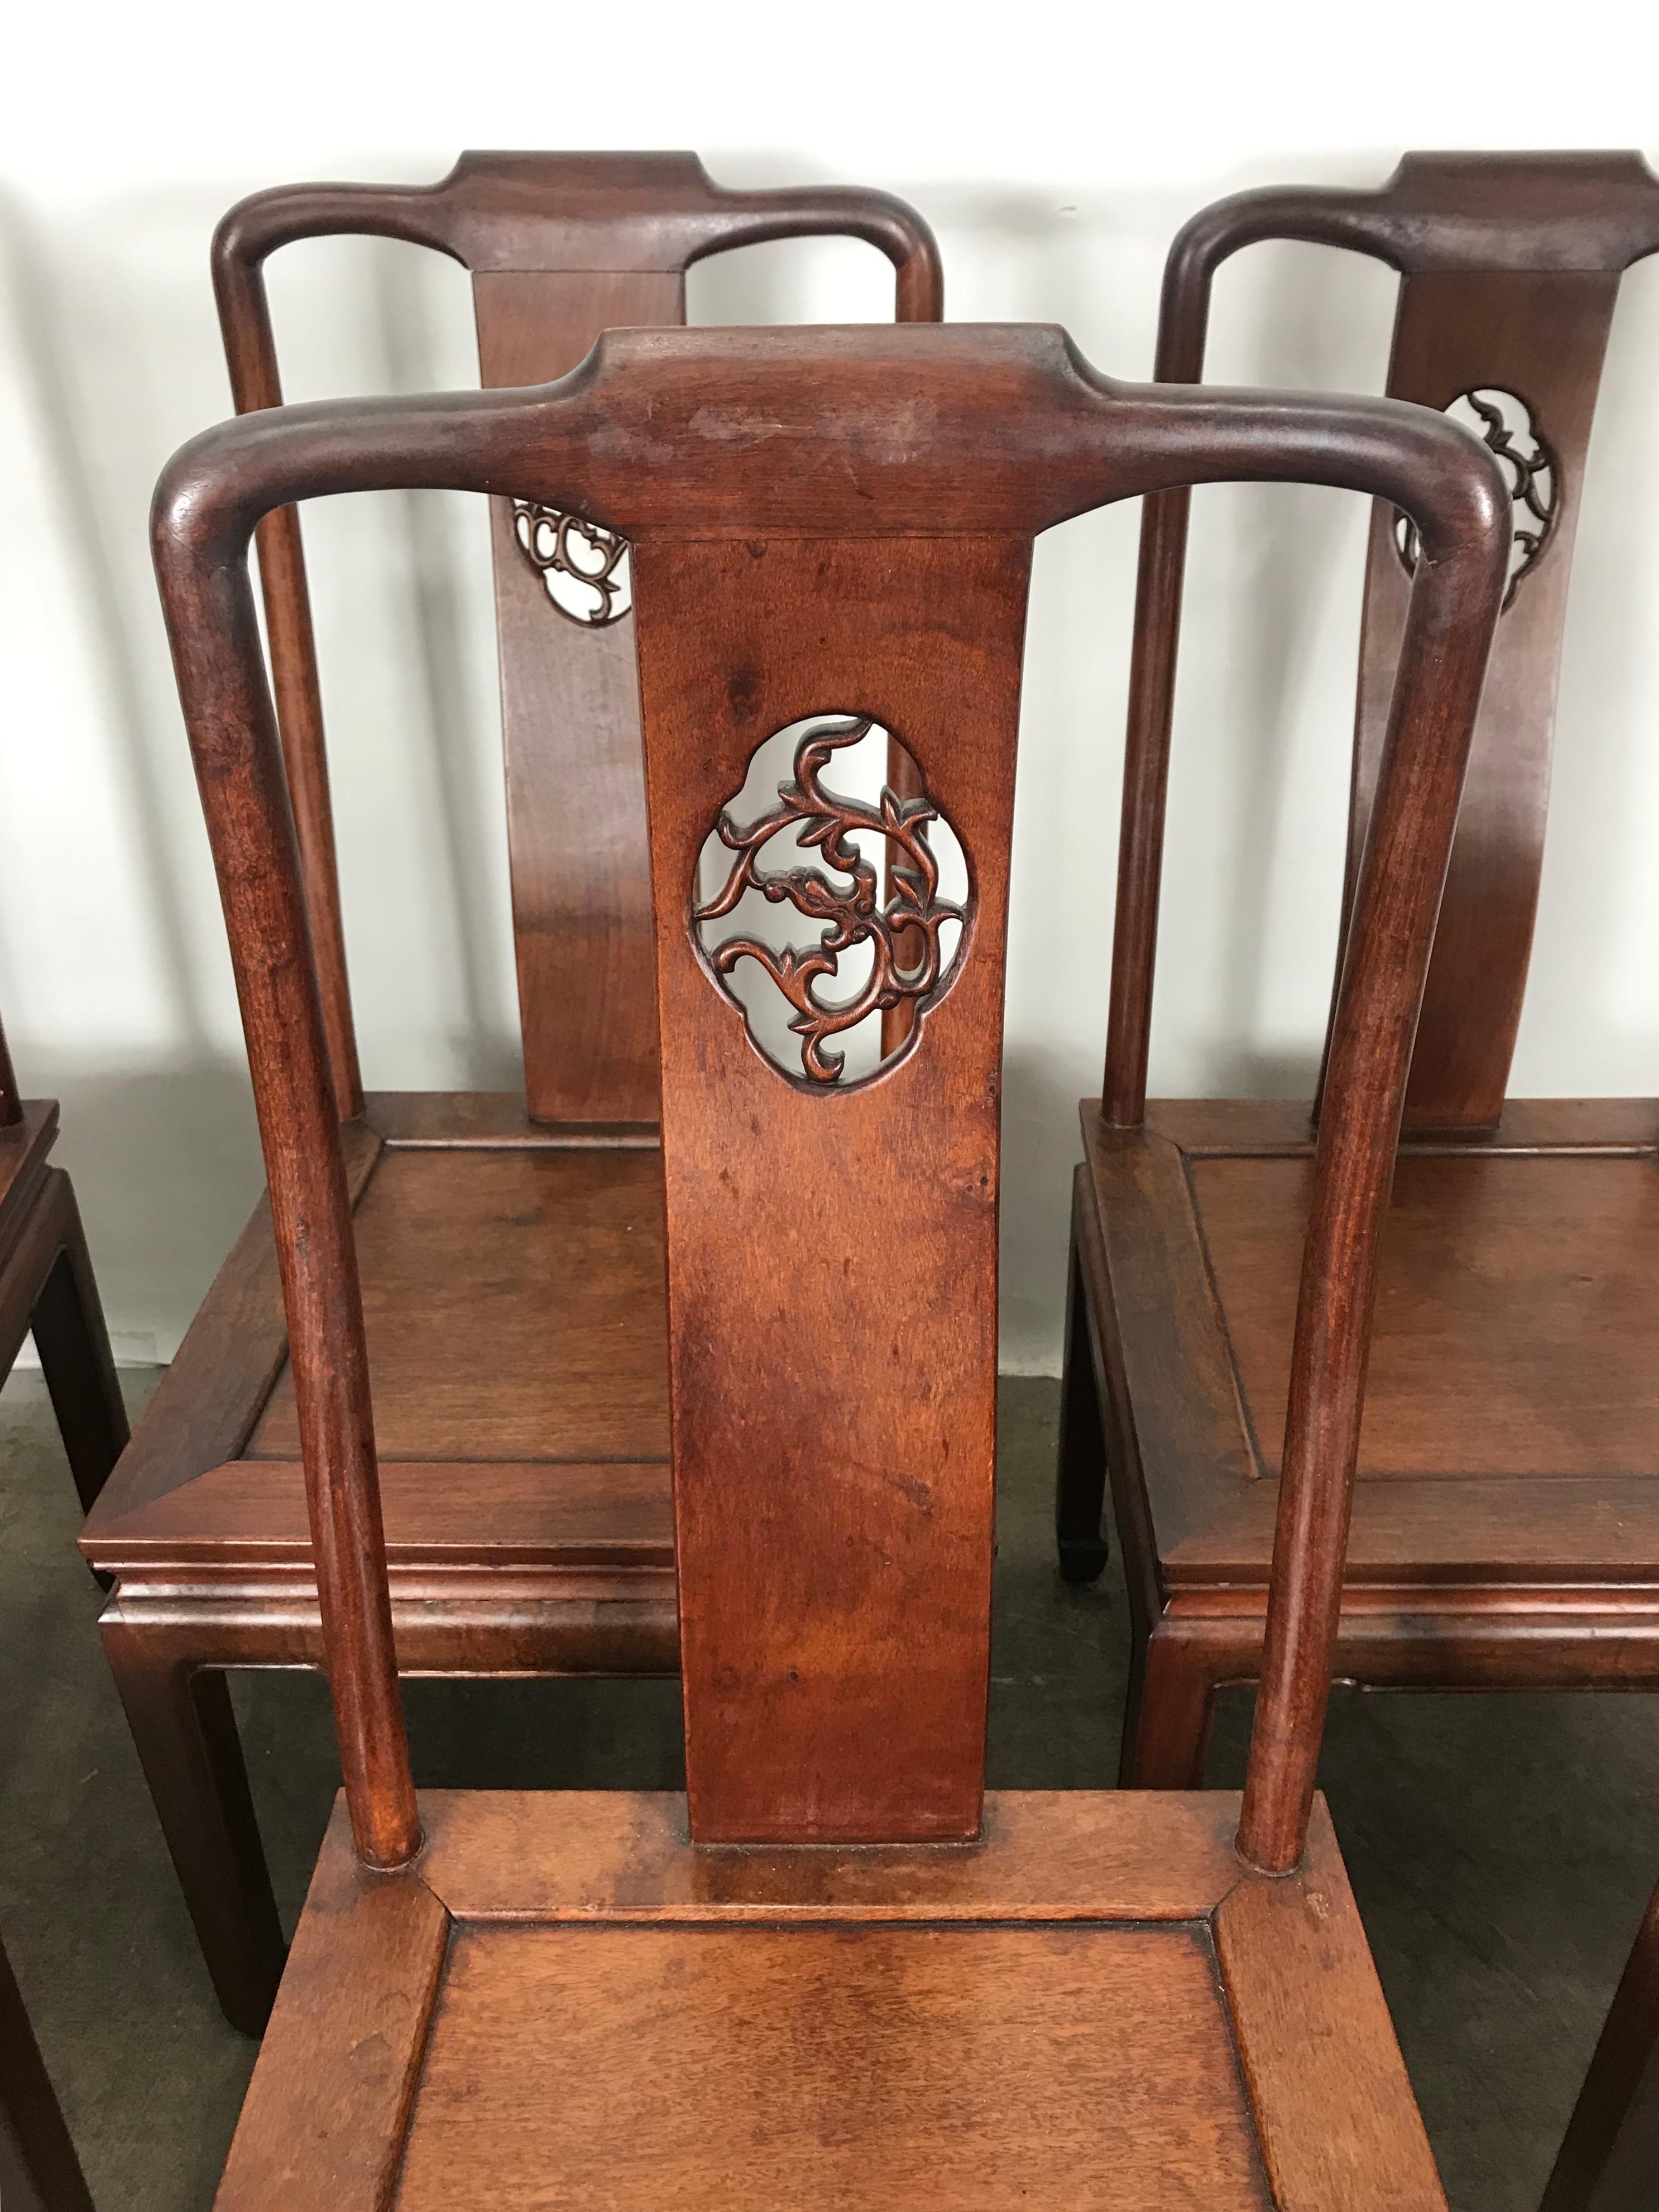 An exceptional set of six Chinese solid carved rosewood dining chairs. The chairs feature solid rosewood construction with beautiful wood grain and nice carved details. solid, sturdy and well built, extremely comfortable, look amazing with modernist